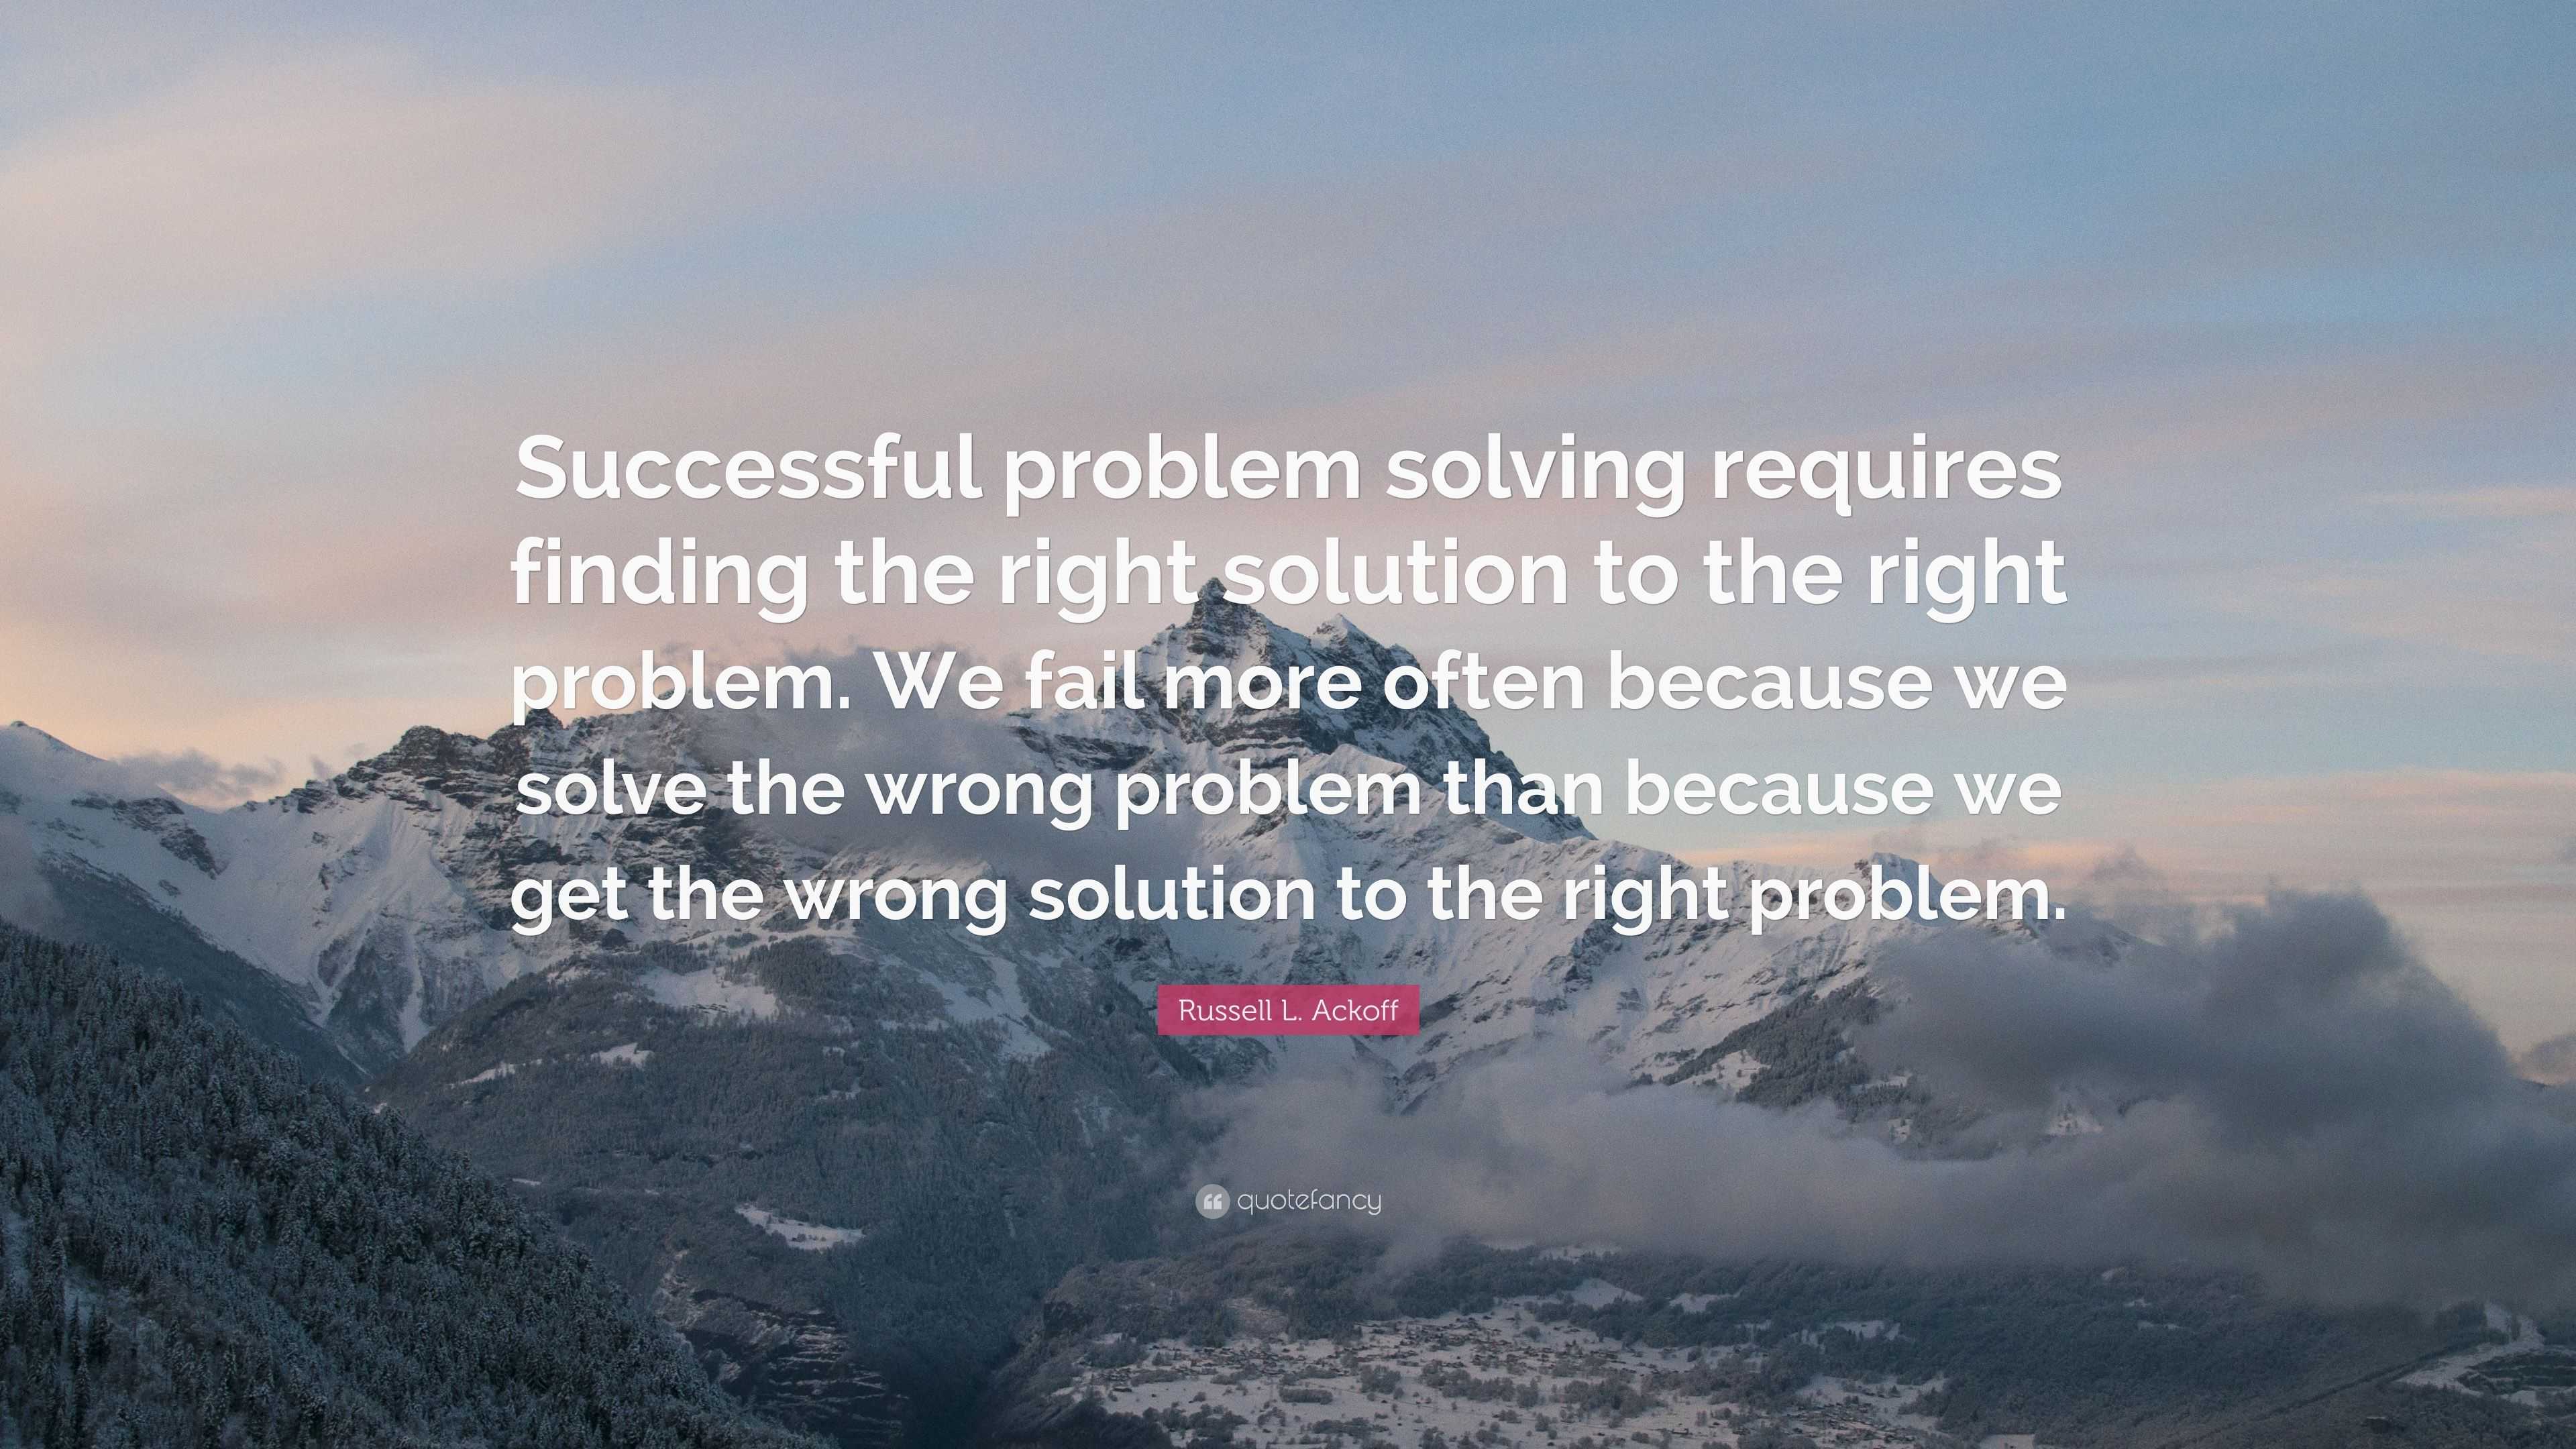 famous quote on problem solving